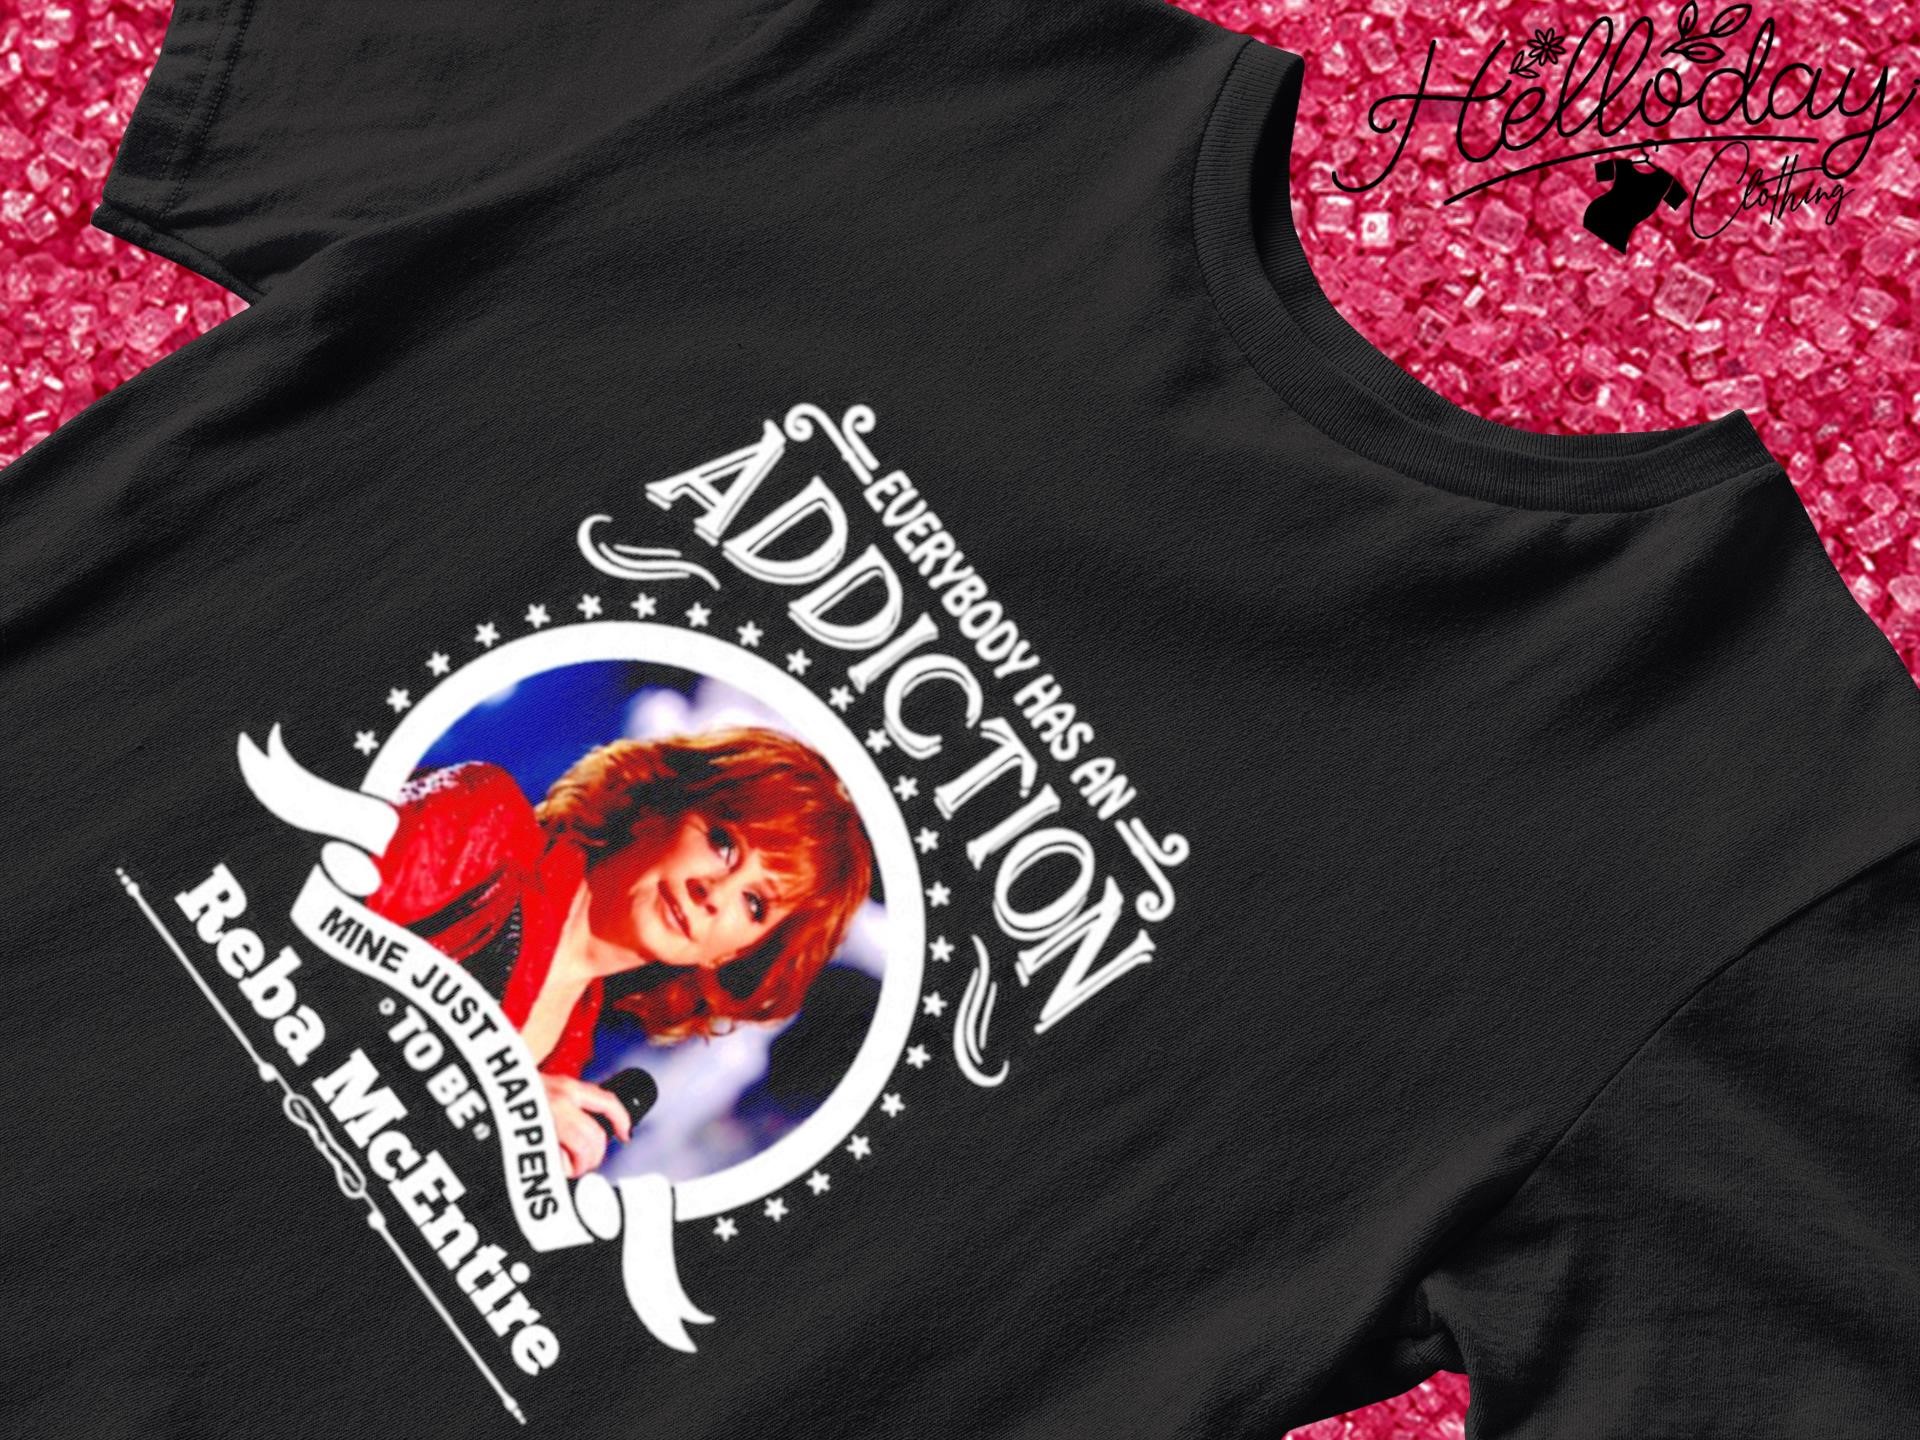 Everybody has an addiction mine just happens to be Reba McEntire T-shirt